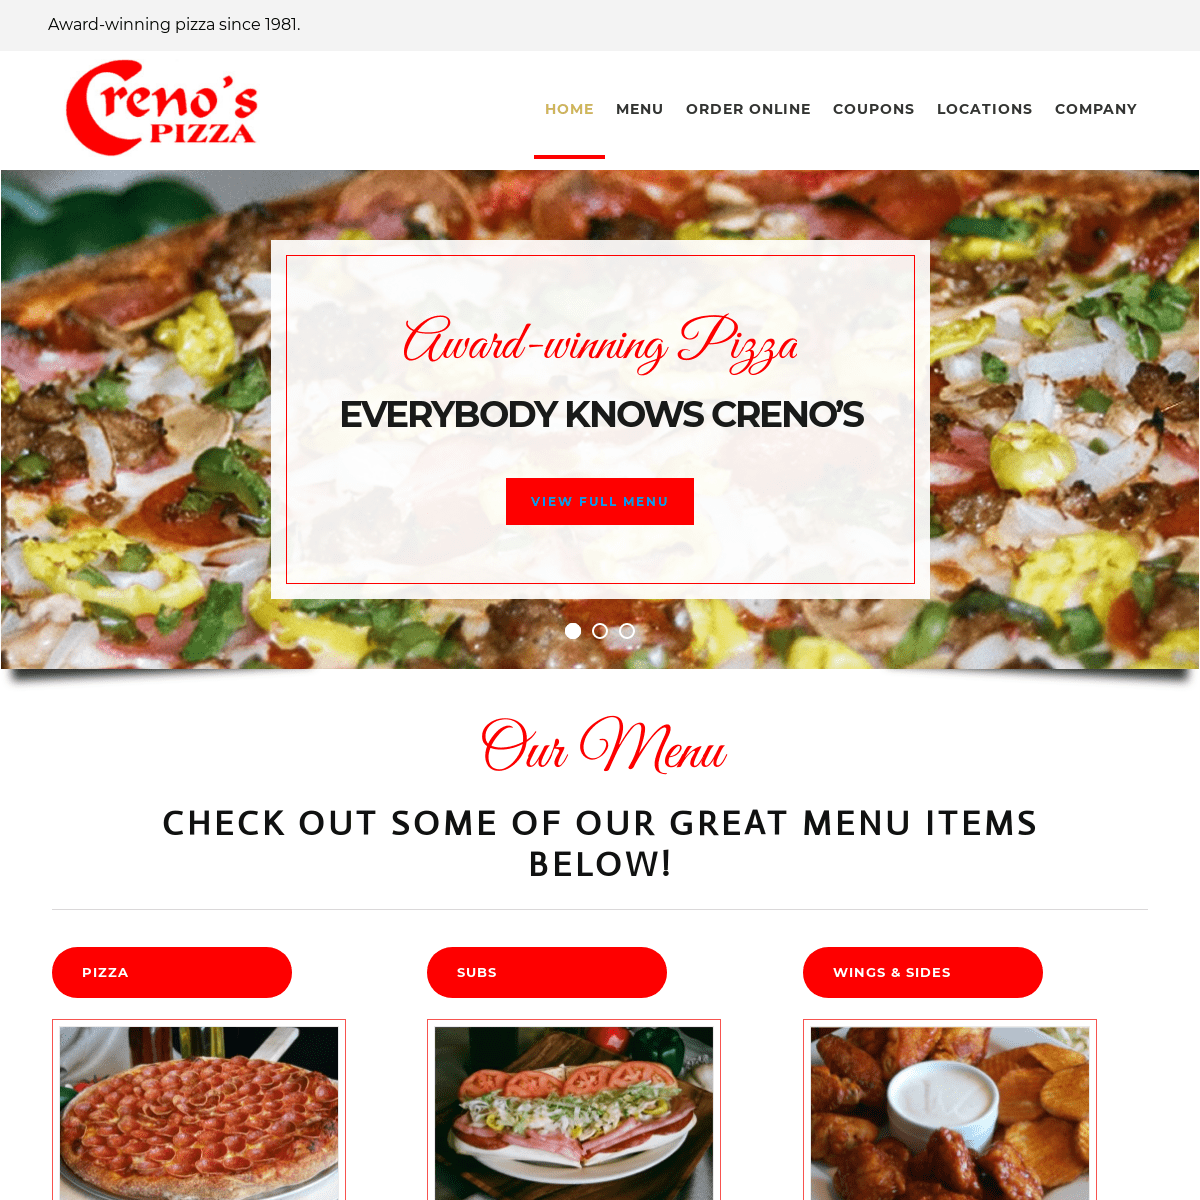 A complete backup of crenospizzaco.com